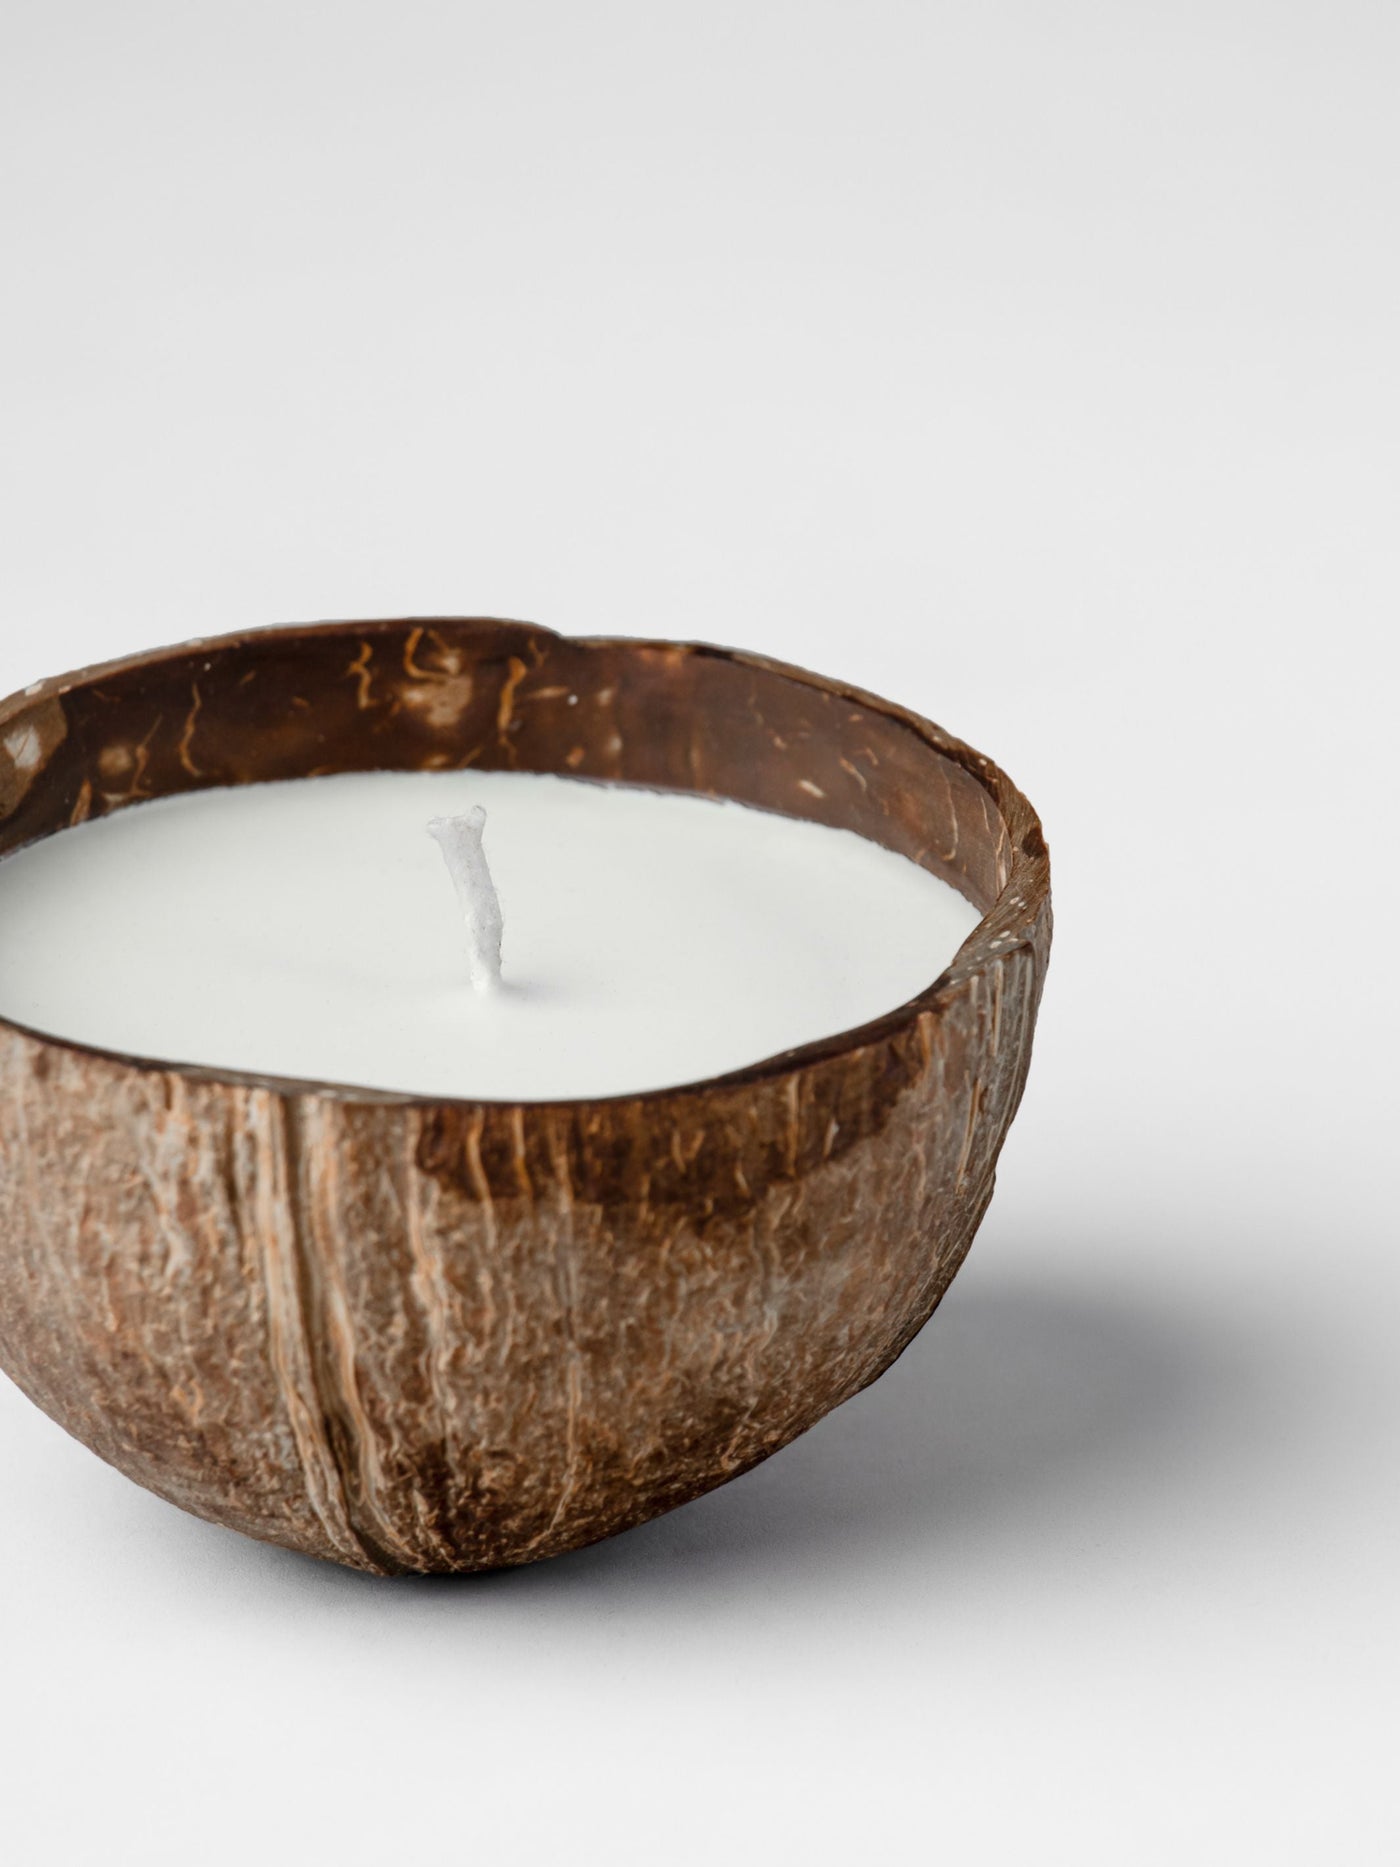 Coconut Shell Candle